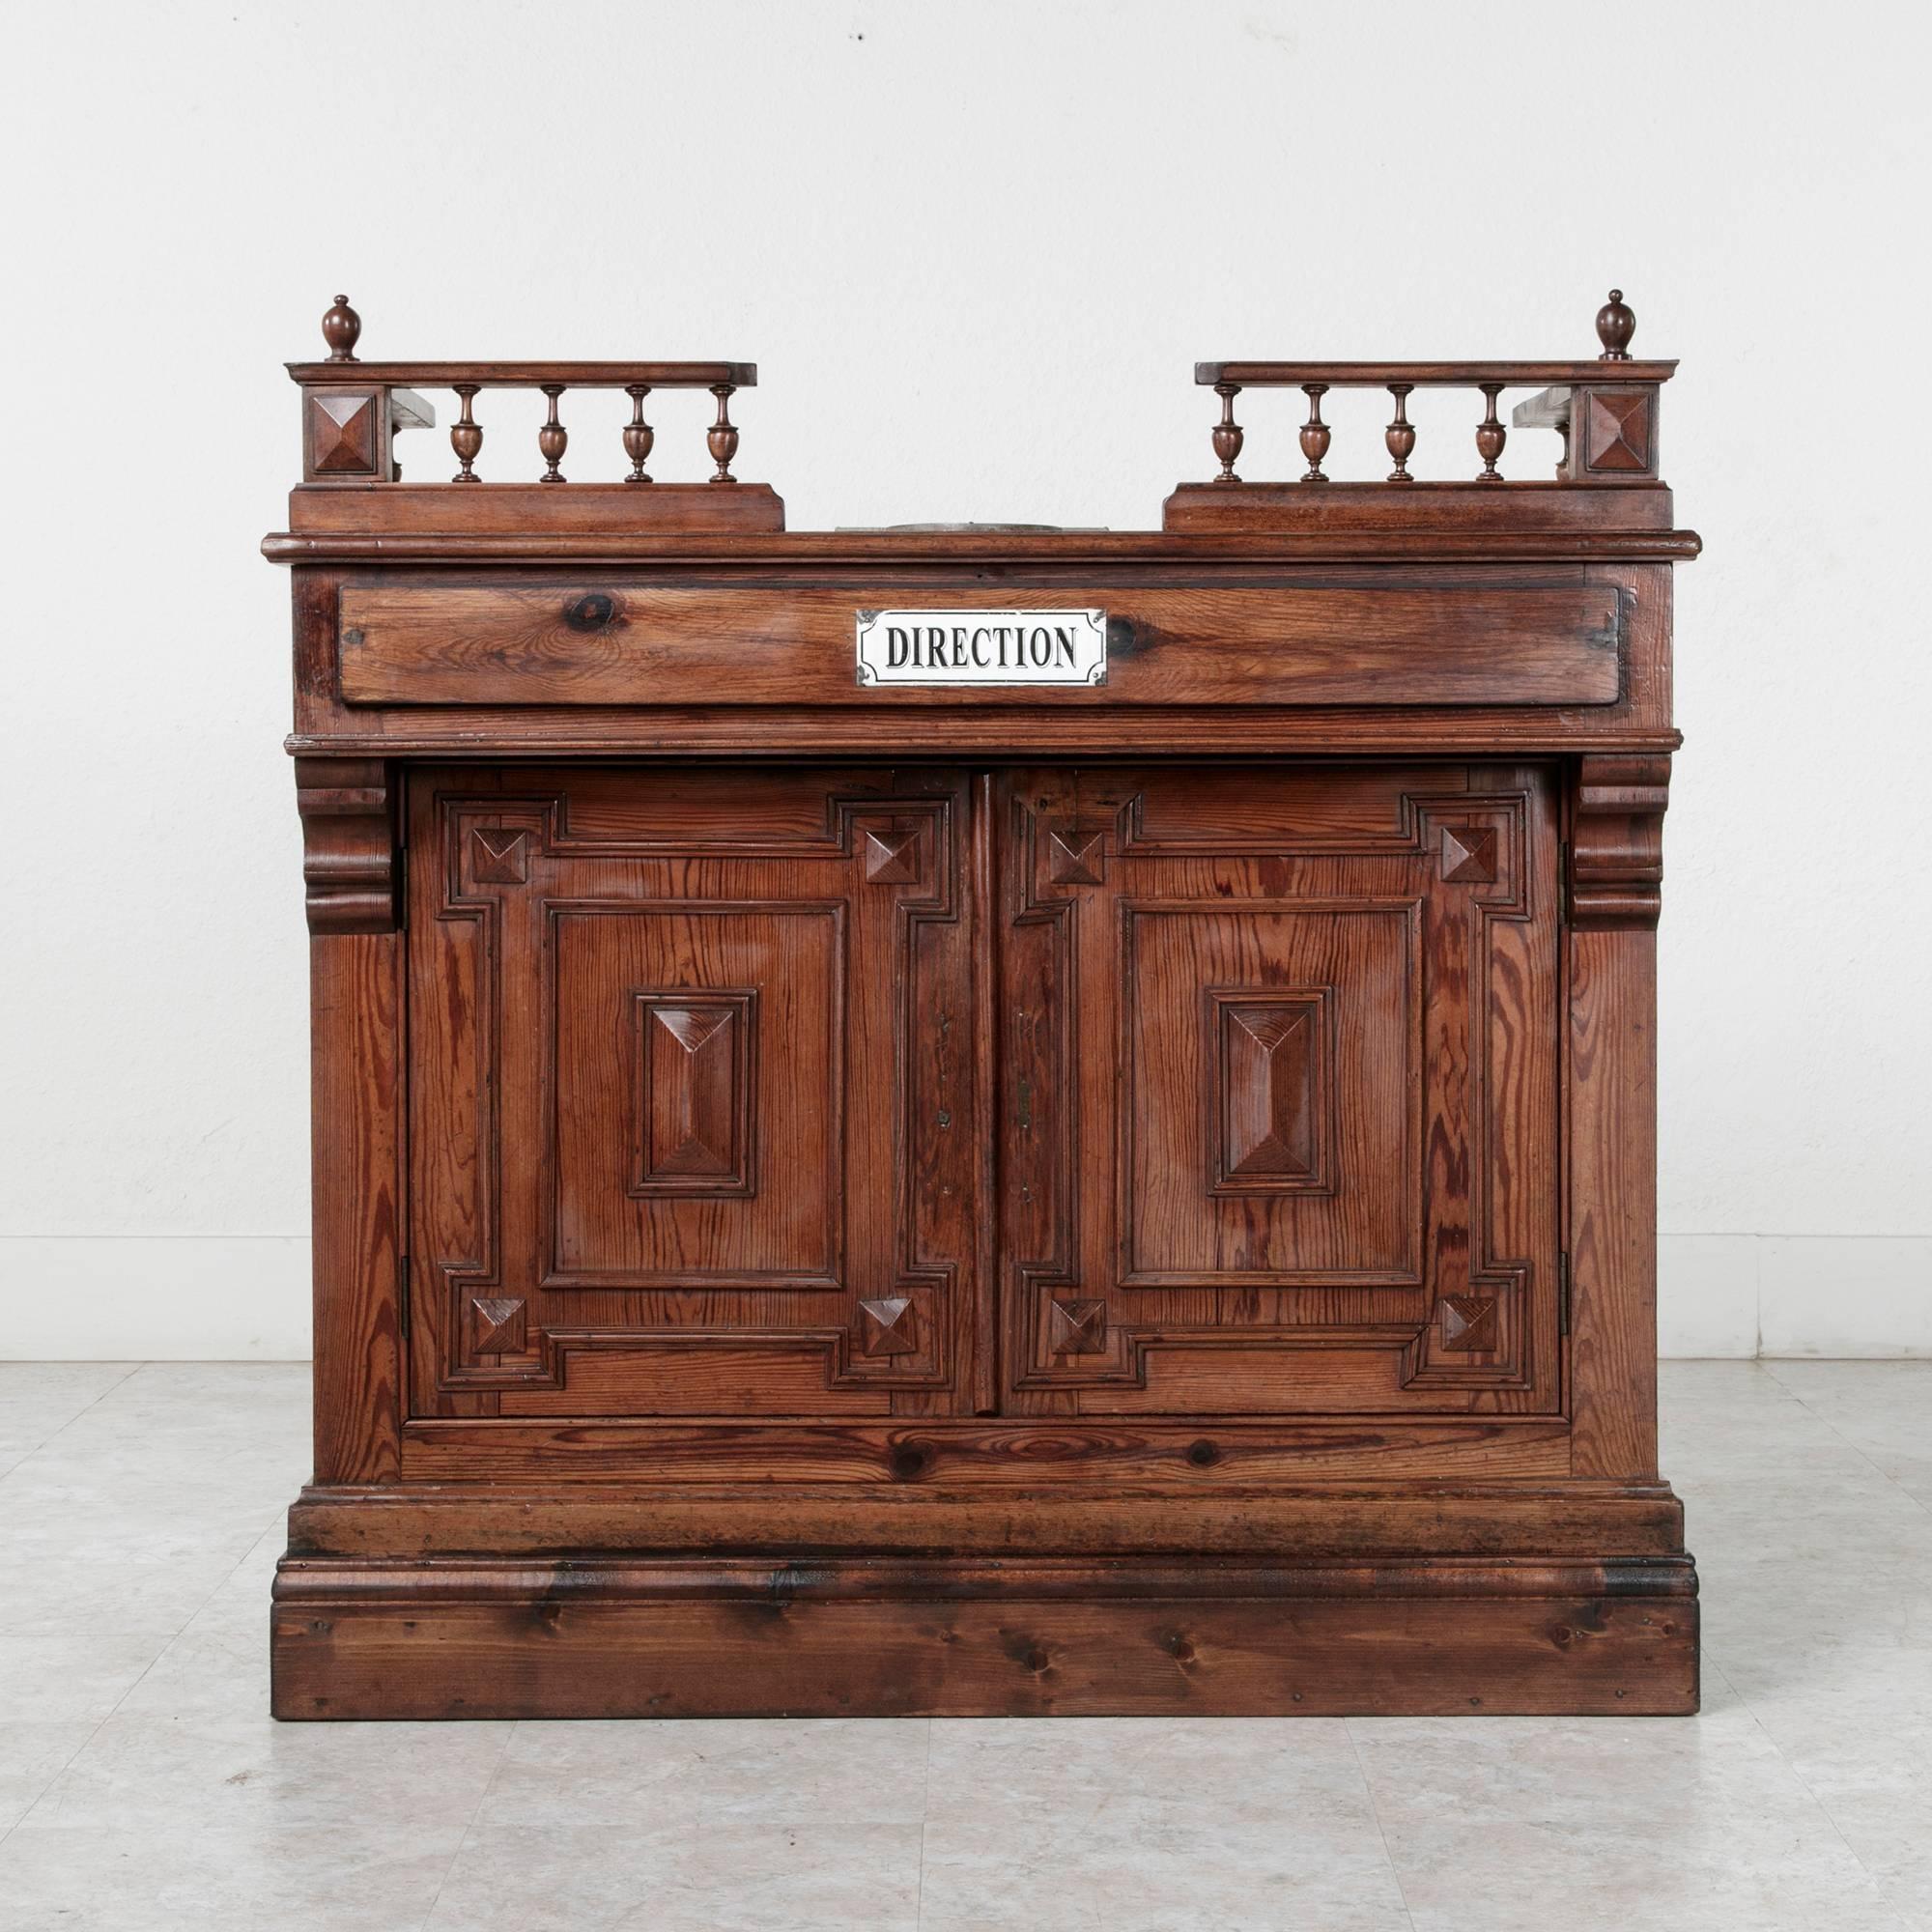 Originally in a French shop, this pitch pine counter features a spooled gallery at the top with diamond pointed corners topped by finials. A metal plate on the top toward the front of the counter was used to lay down coins and count back change. The